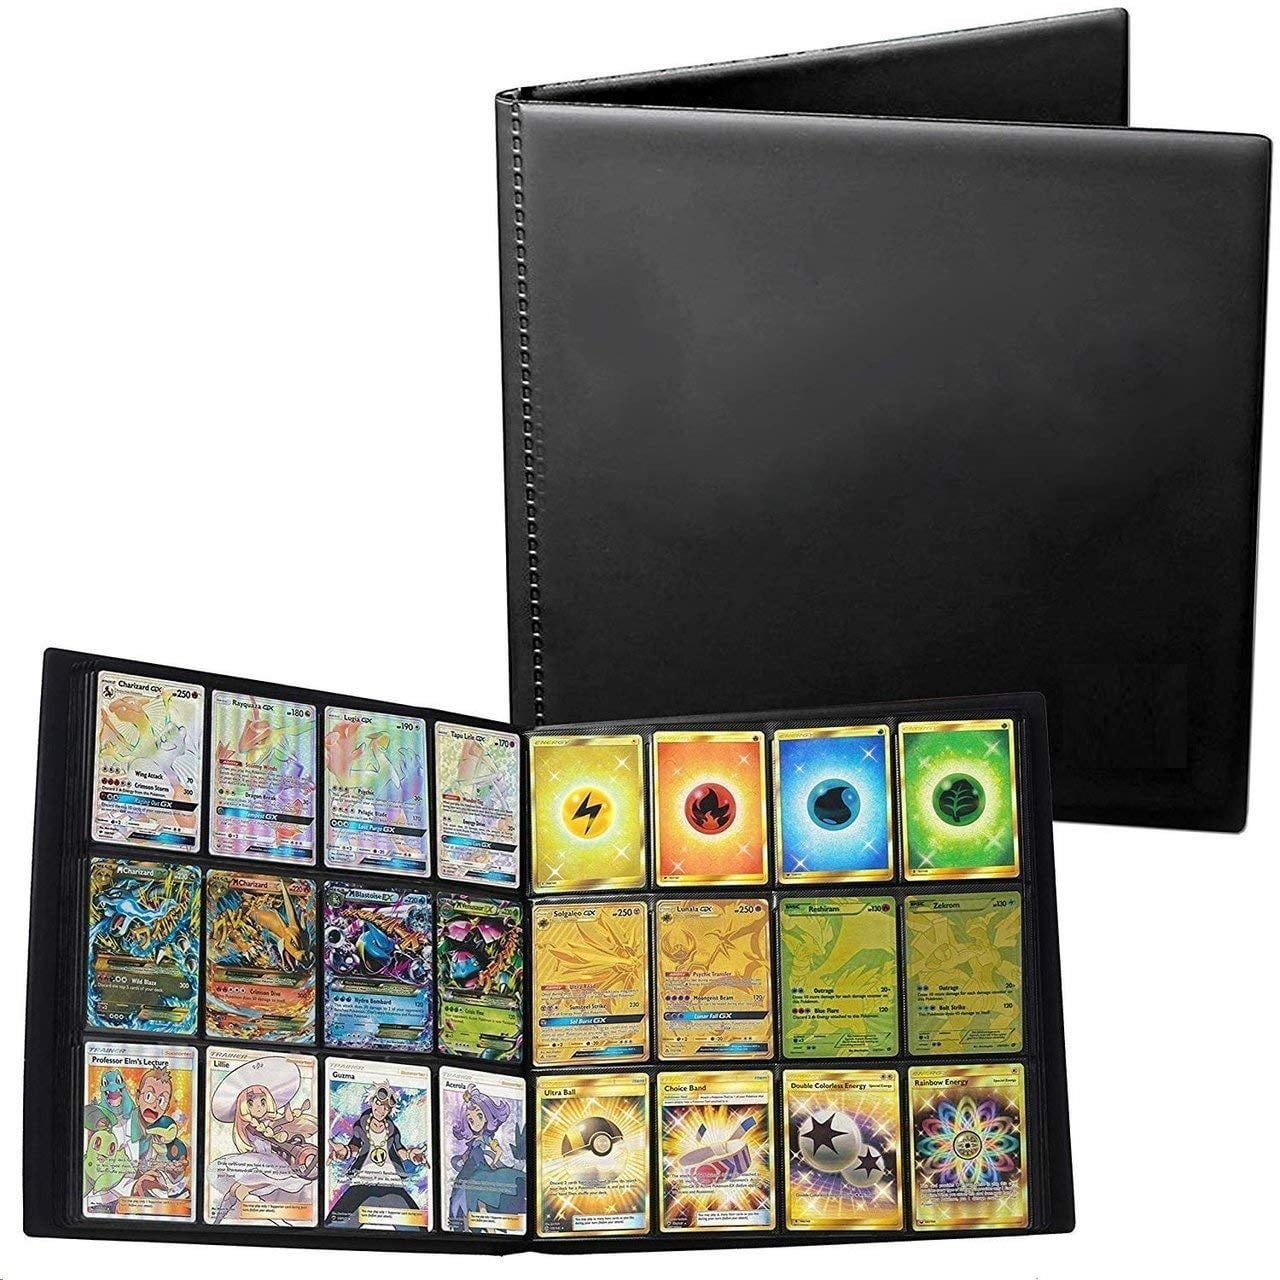 QUALITY A4 PADDED BINDER BINDER ALBUM FOR STORING TRADING CARDS 